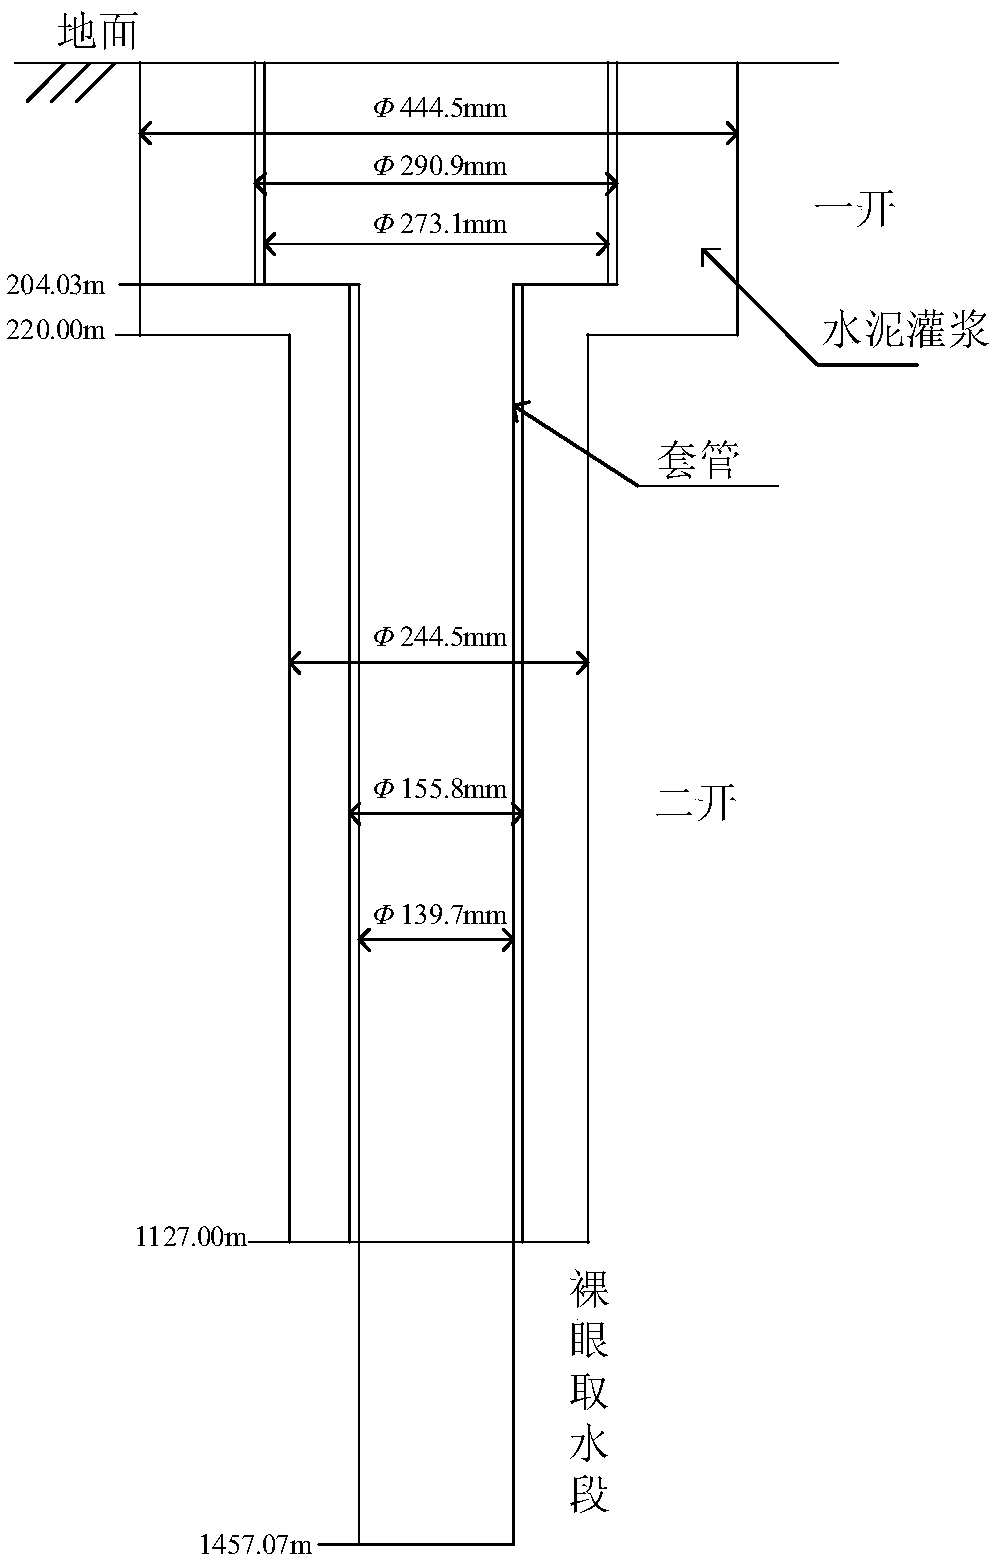 Efficient numerical simulation method and device for urban scale geothermal field group well system